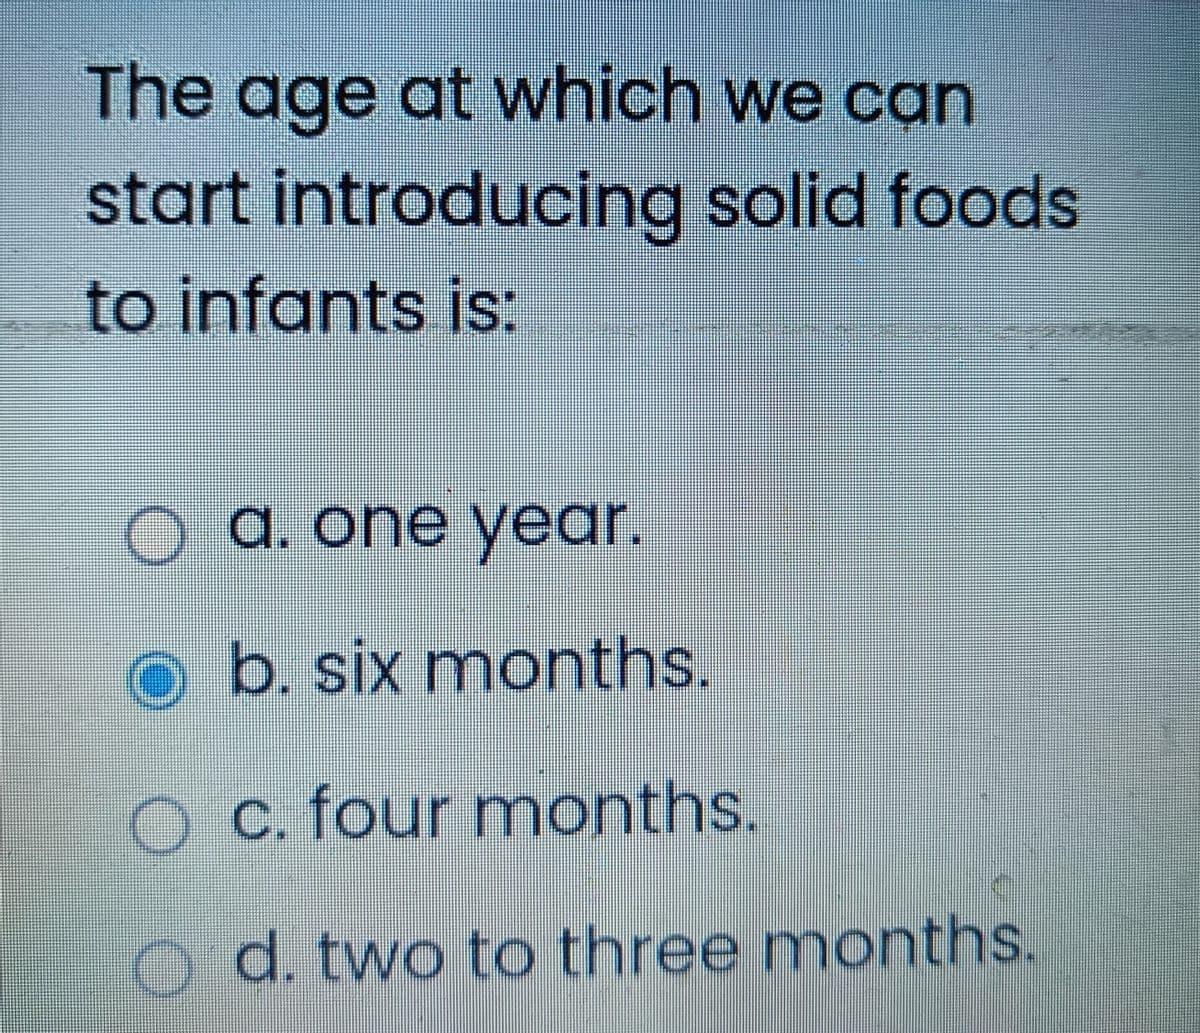 The age at which we can
start introducing solid foods
to infants is:
© a. one year.
Ob. six months.
O c. four months.
OO
d. two to three months.